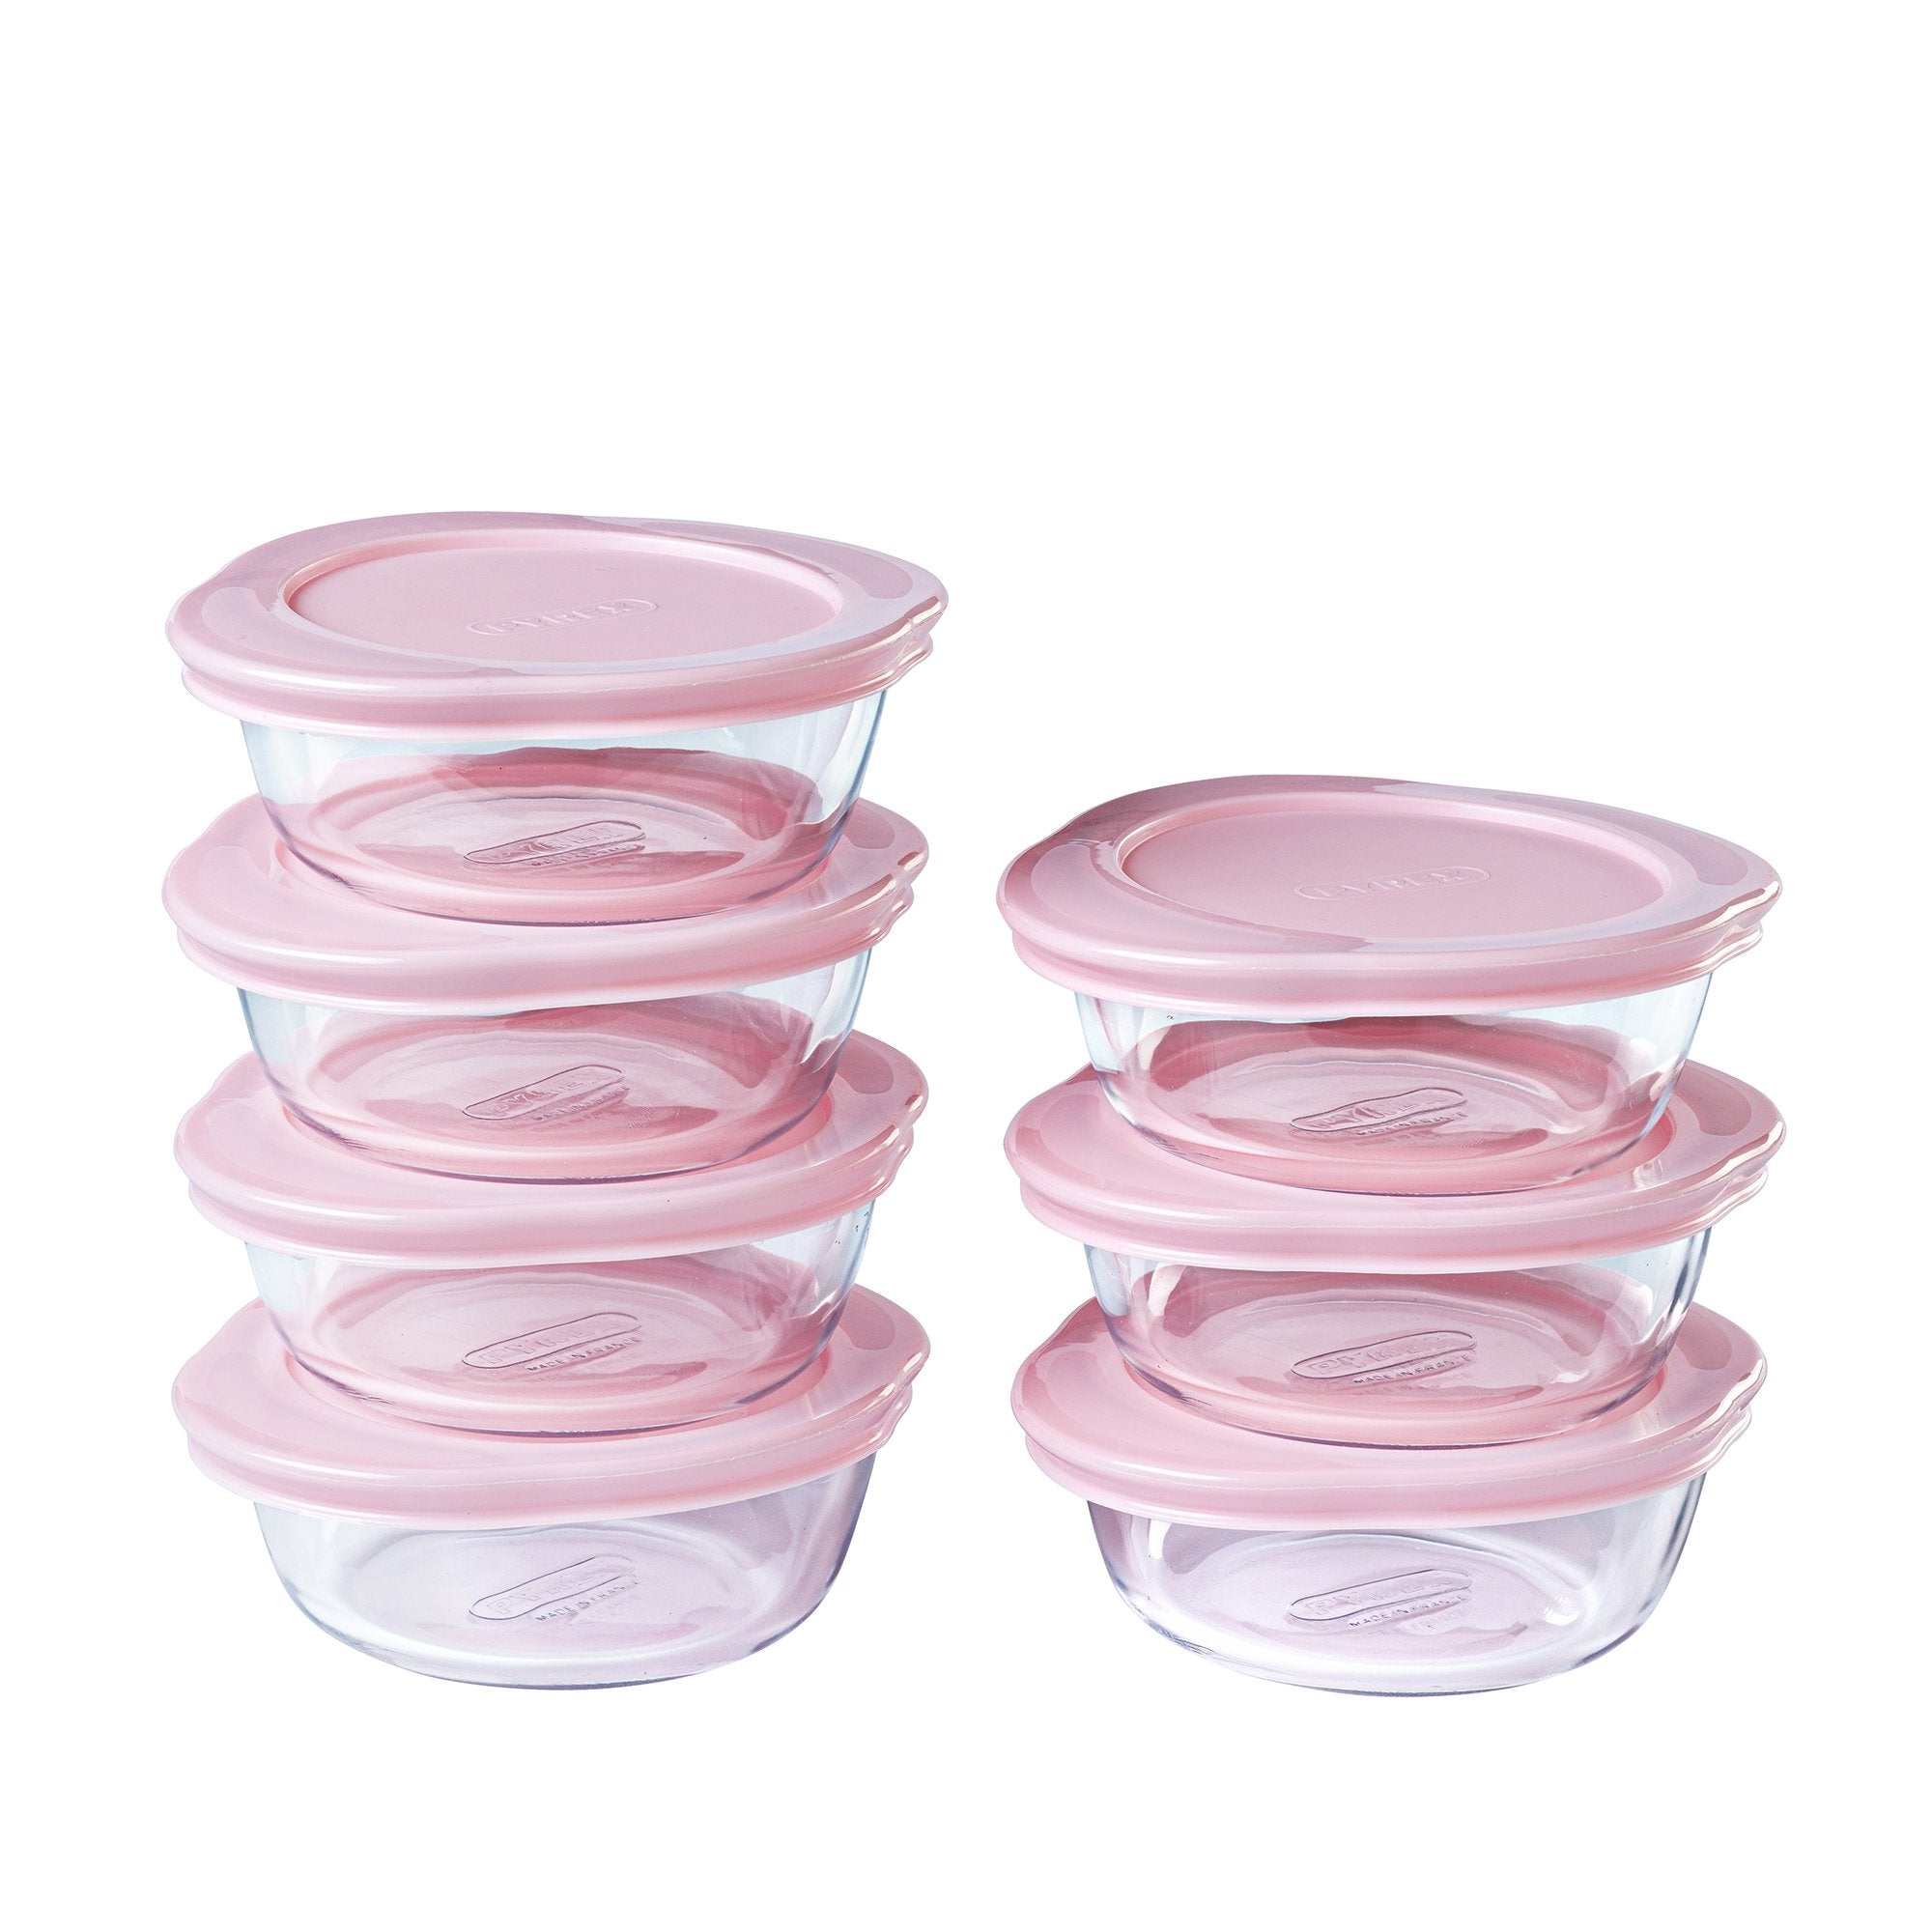 Set of 7 dishes My First Pyrex - Round Baby Food Storage Pink